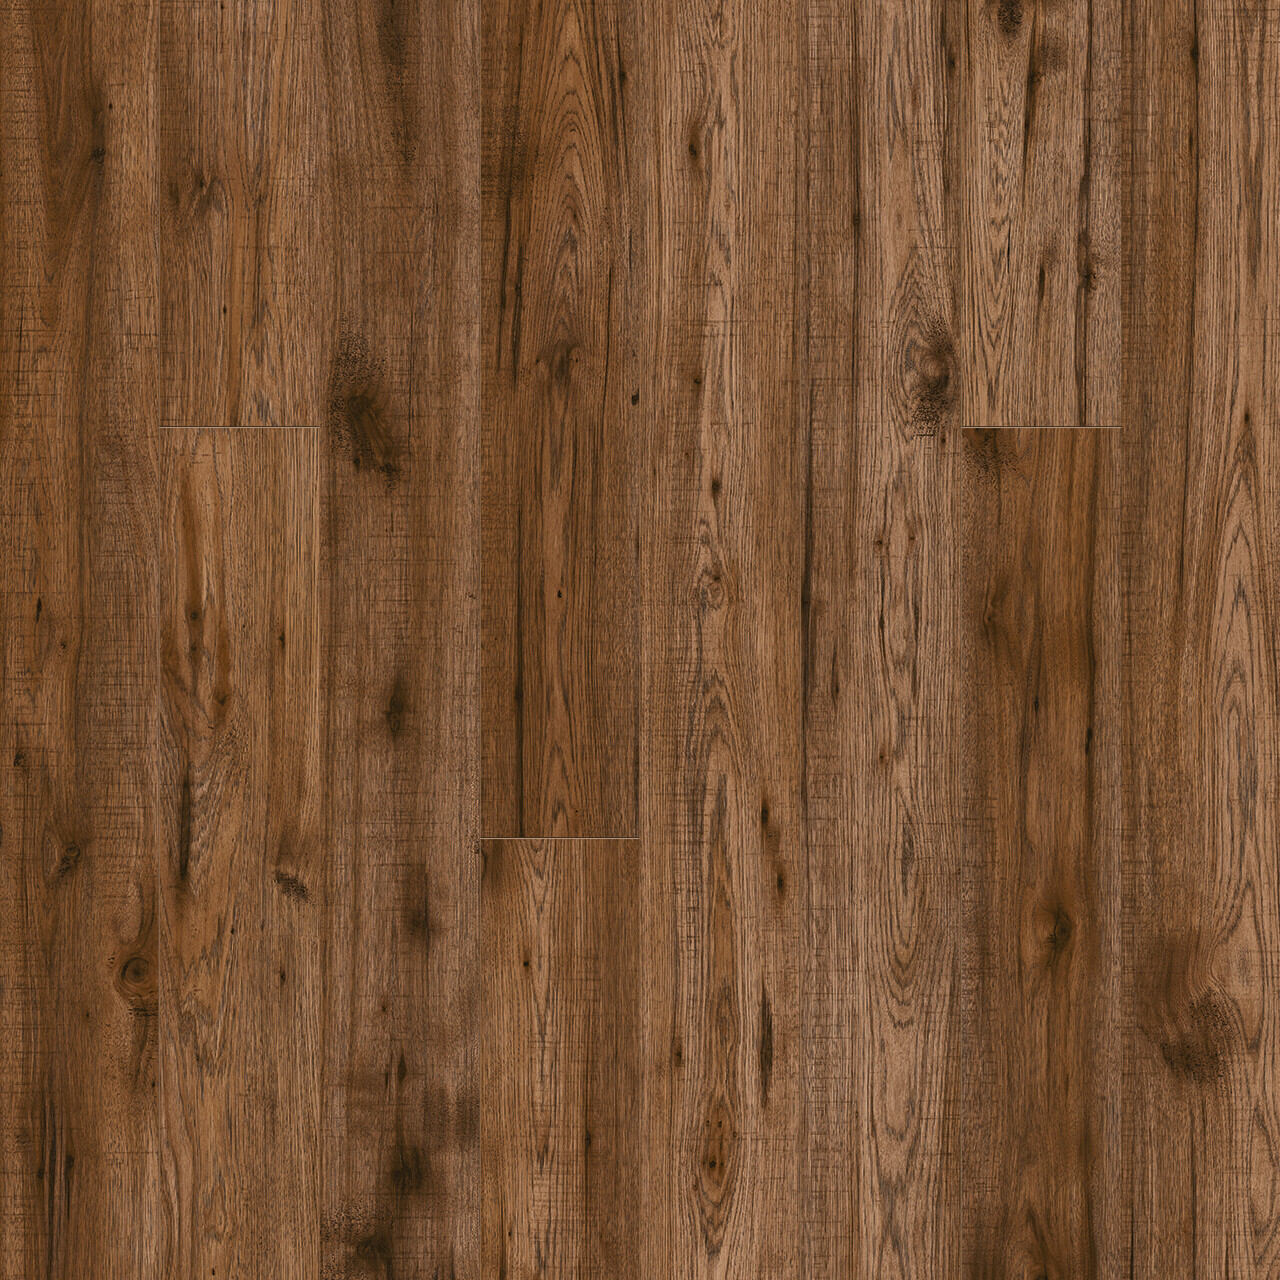 Engineered Floors - Wood Lux Collection - 8 in. x 54 in. - The Highlands